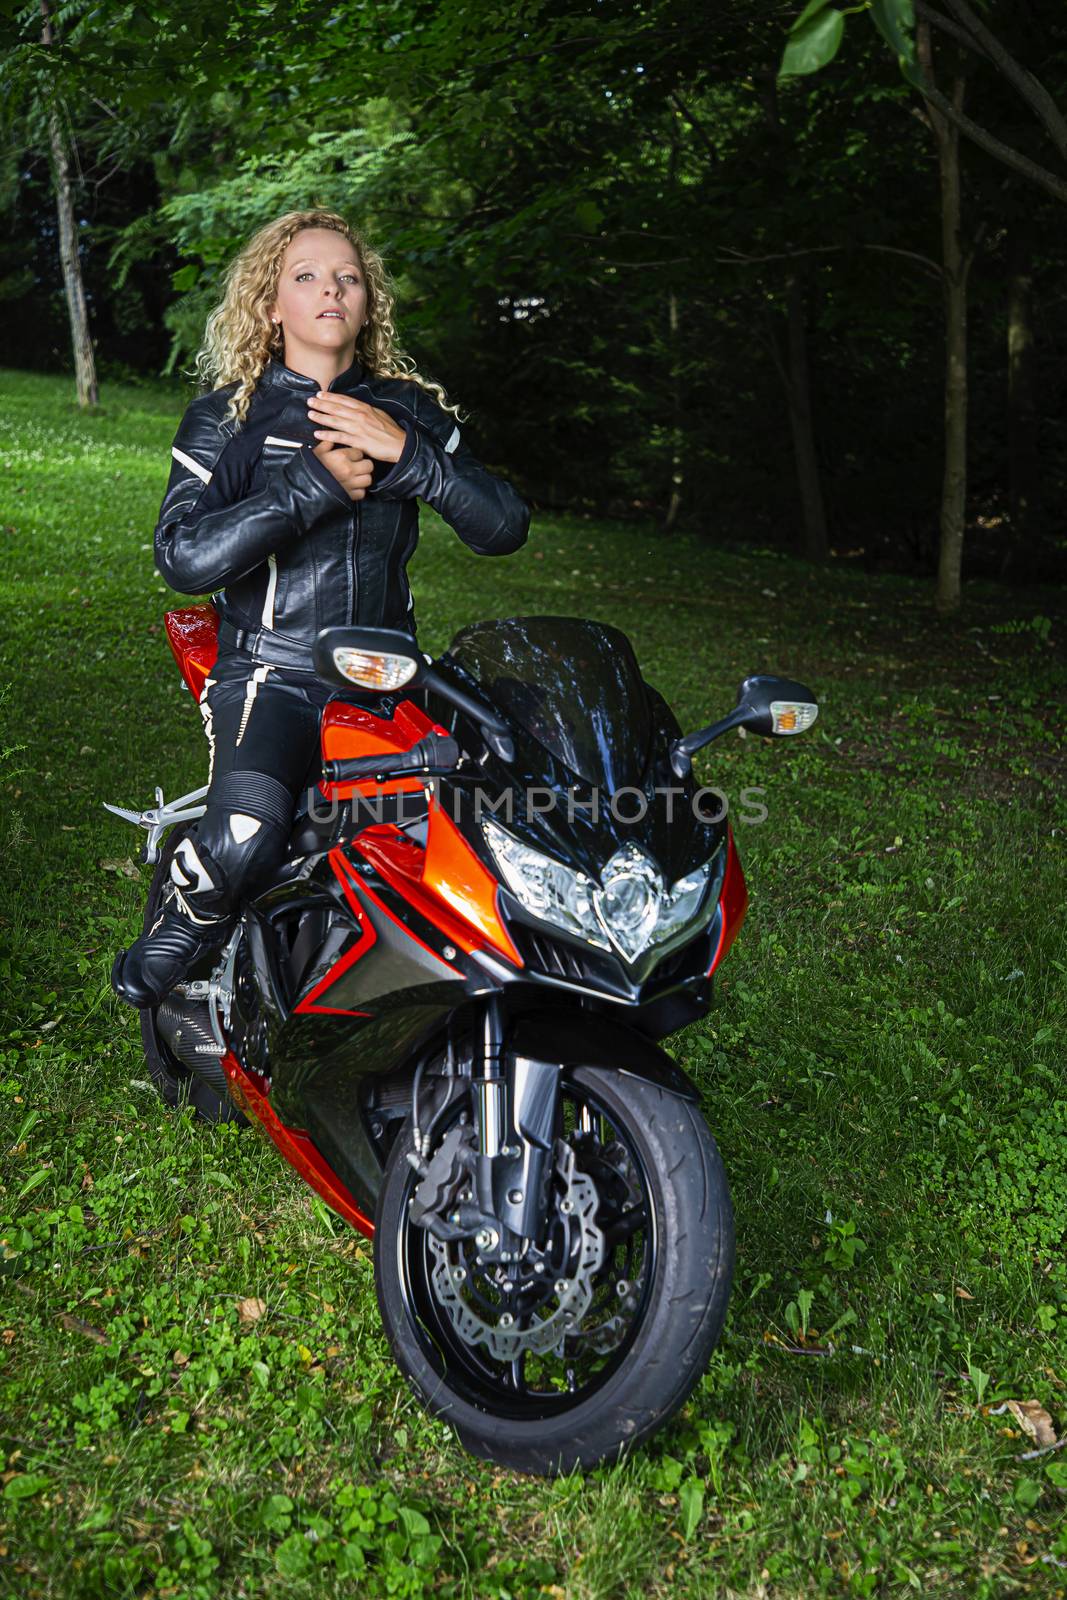 young blond motocyclist zipping up her leather jacket while sitting on her sport motocycle